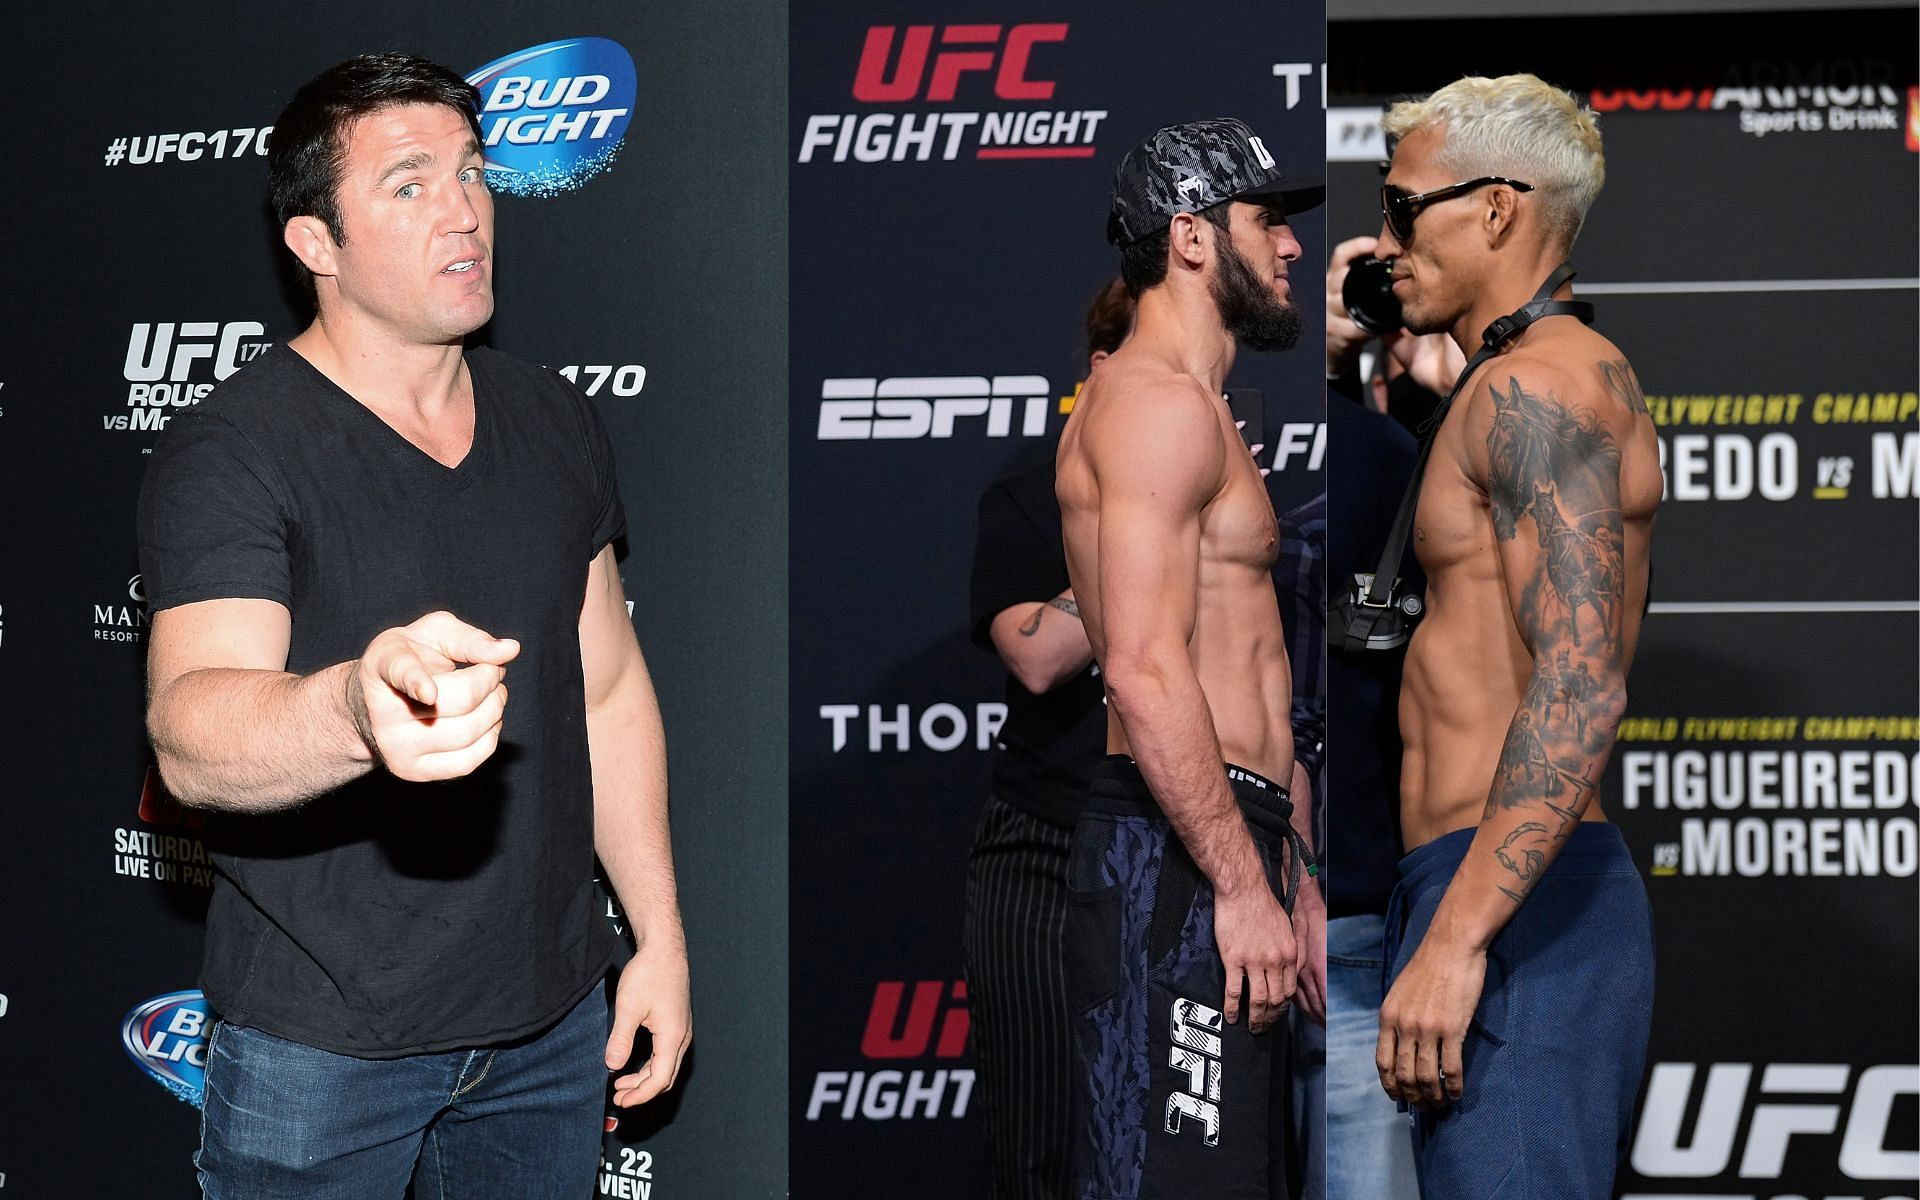 From left to right: Chael Sonnen, Islam Makhachev, Charles Oliveira